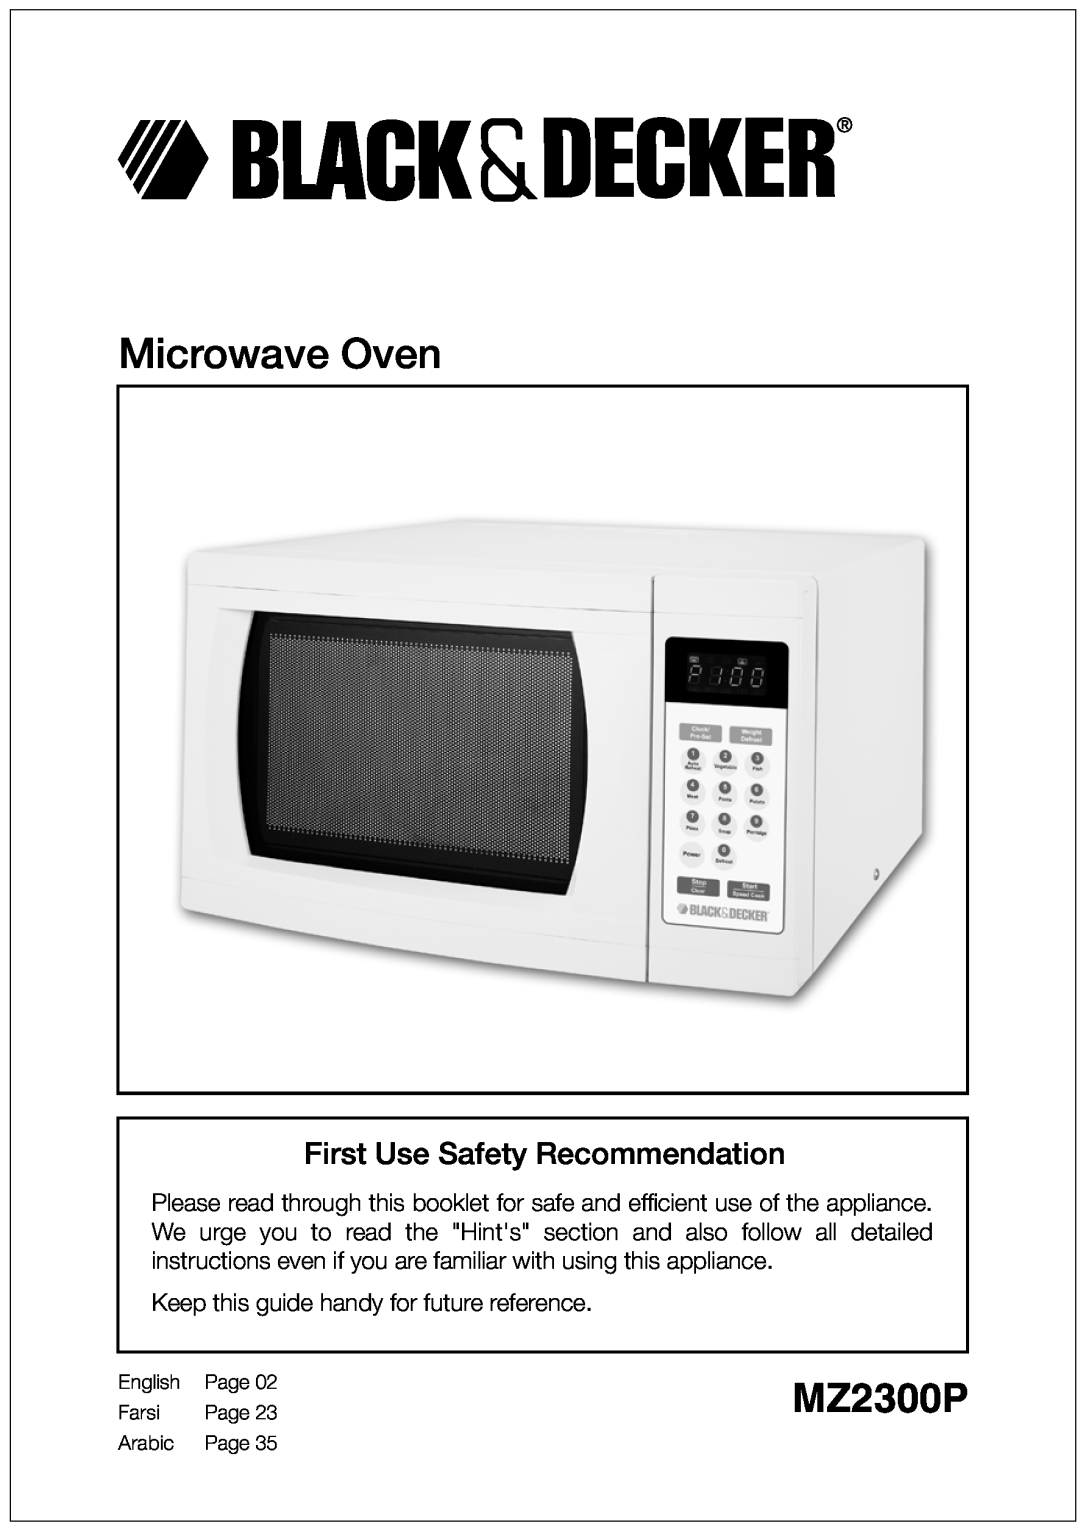 Black & Decker MZ2300P manual First Use Safety Recommendation, Microwave Oven 